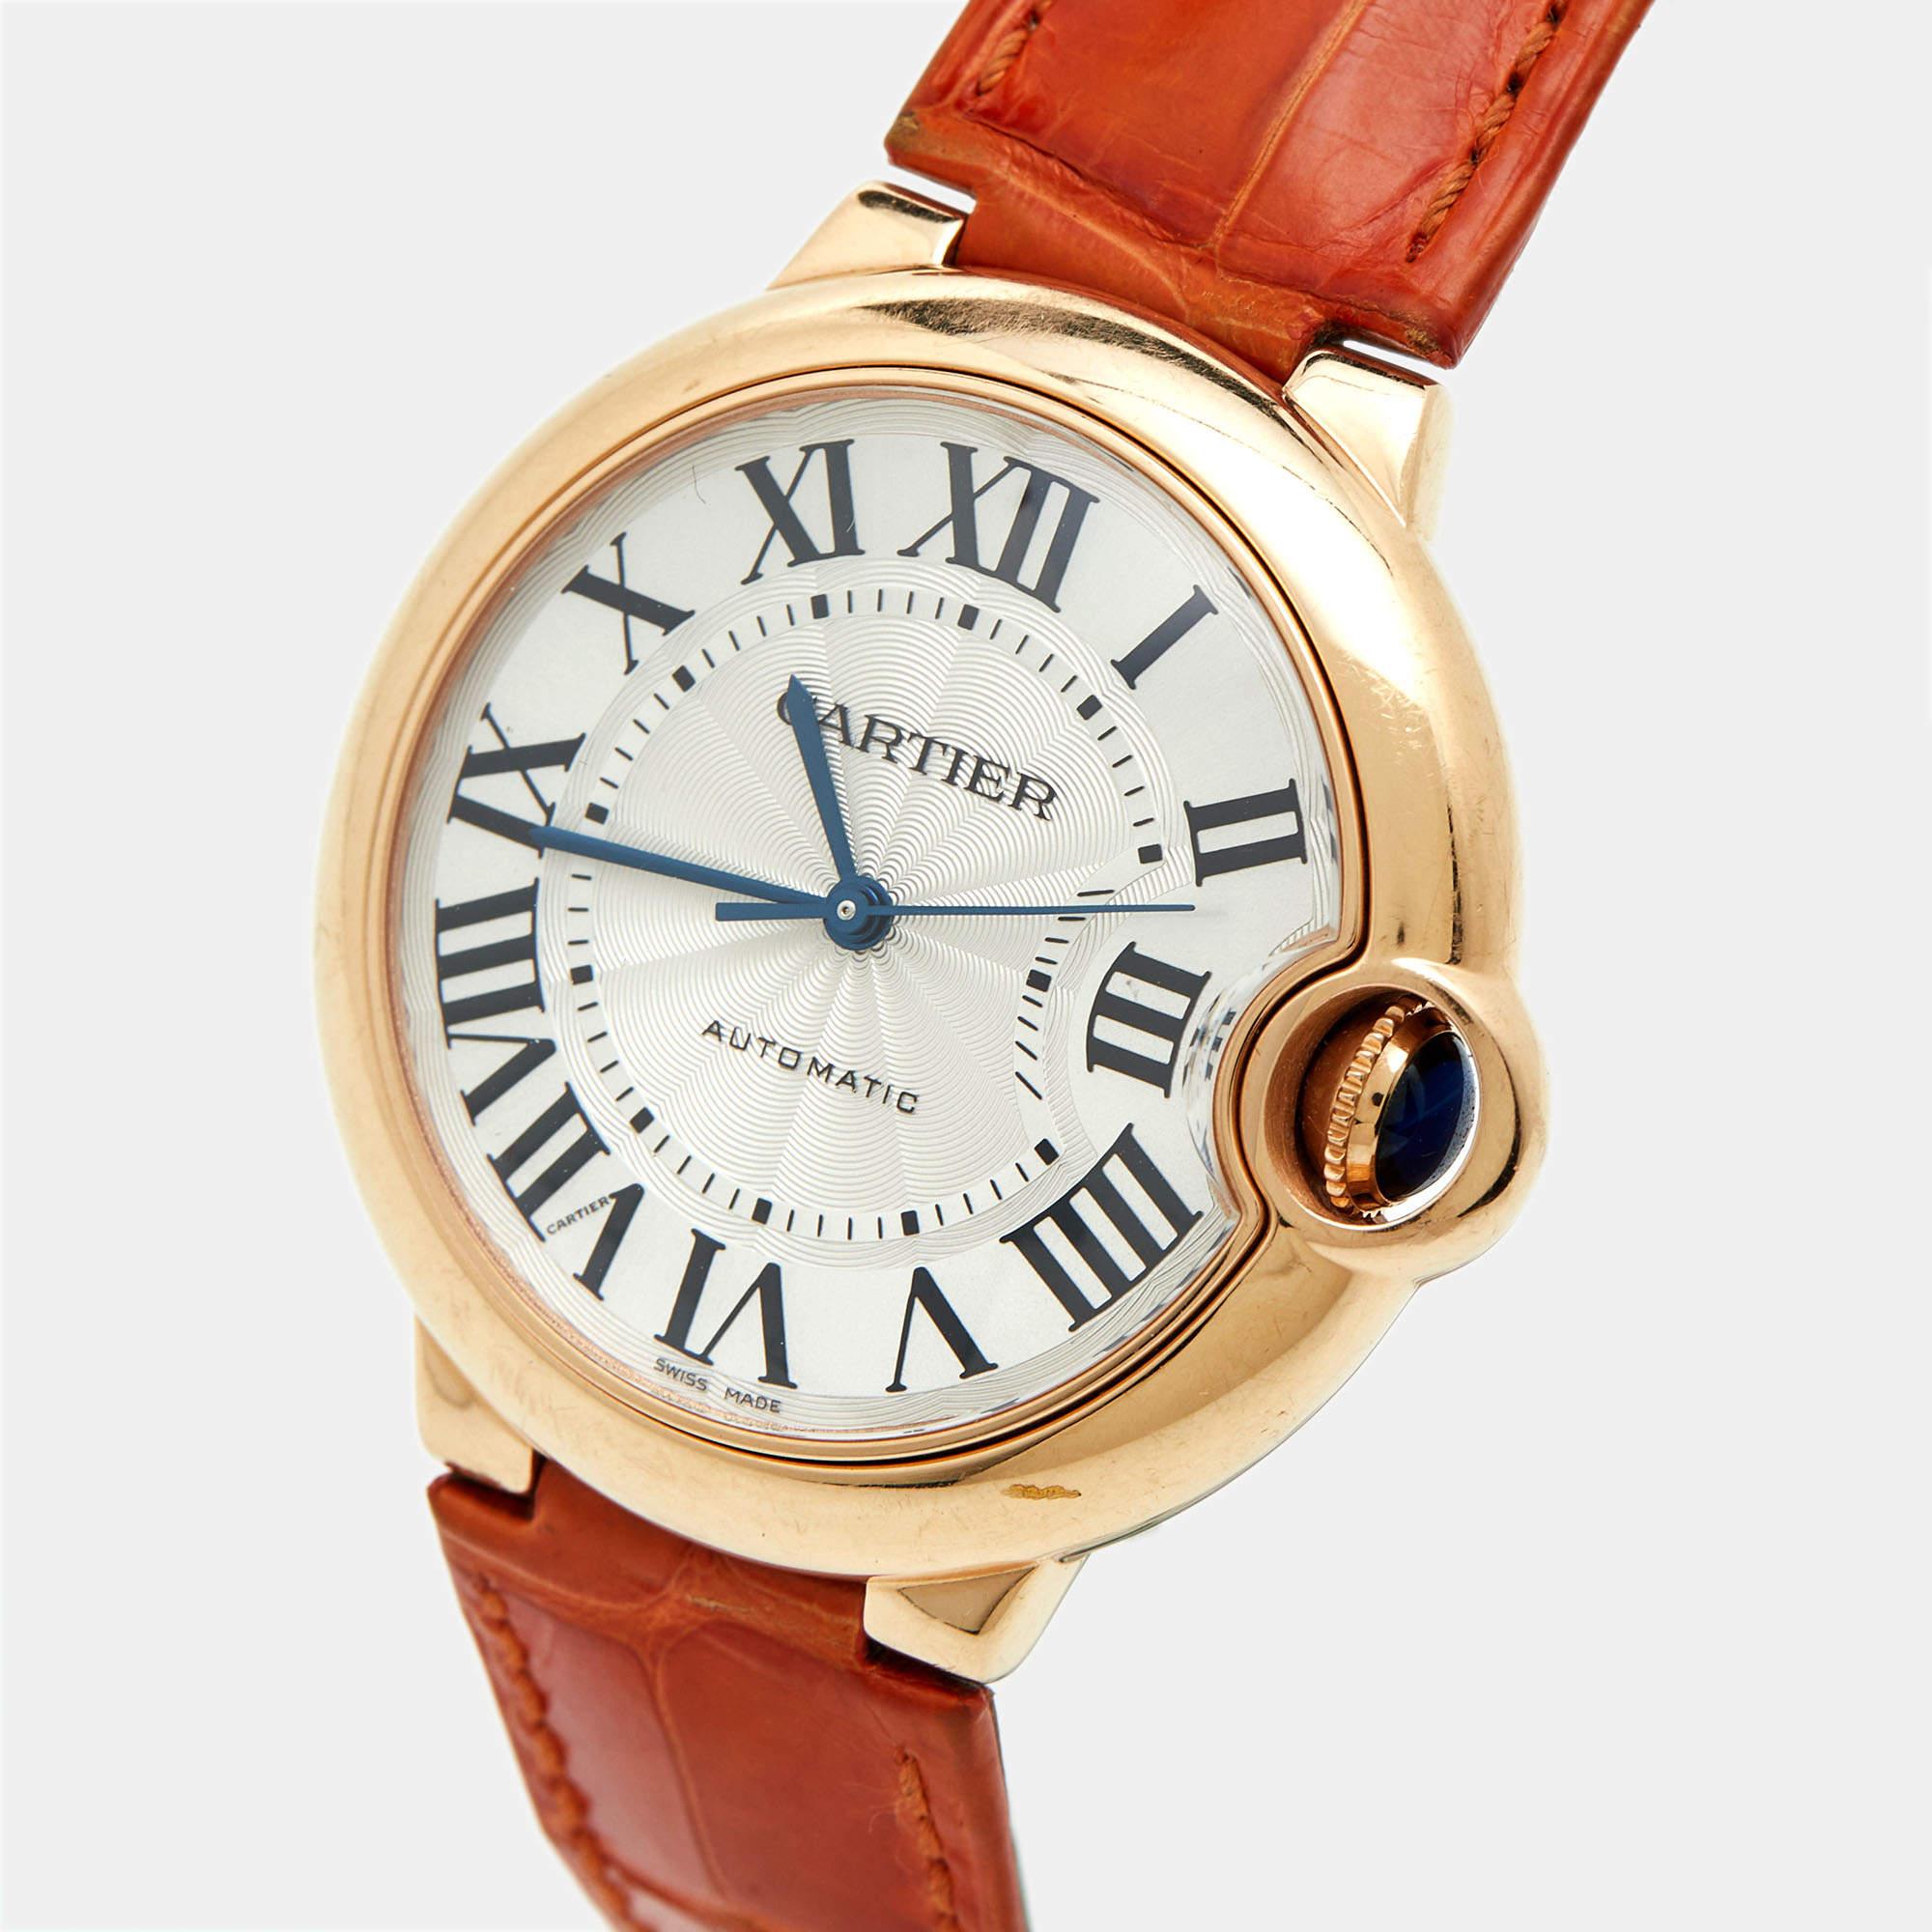 First created in 2007, the Cartier Ballon Bleu watch is a song of details and harmony. The now-iconic watch gets its identity from the guarded blue bubble of the winding crown on the side. The Ballon Bleu 3003 watch we have here is for women, and it